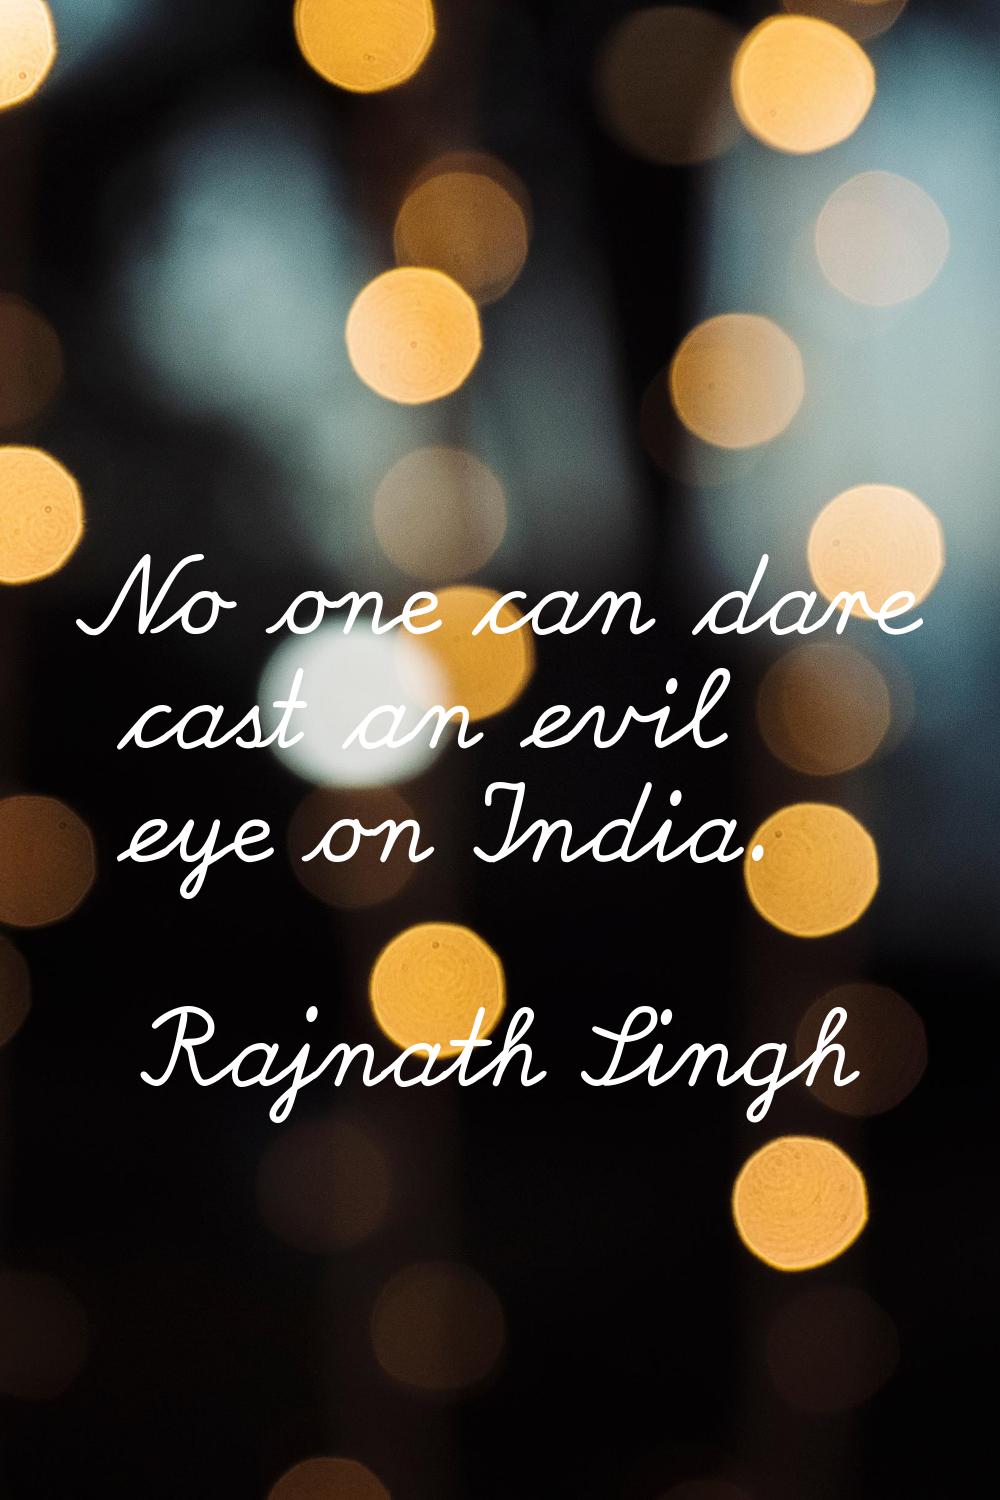 No one can dare cast an evil eye on India.